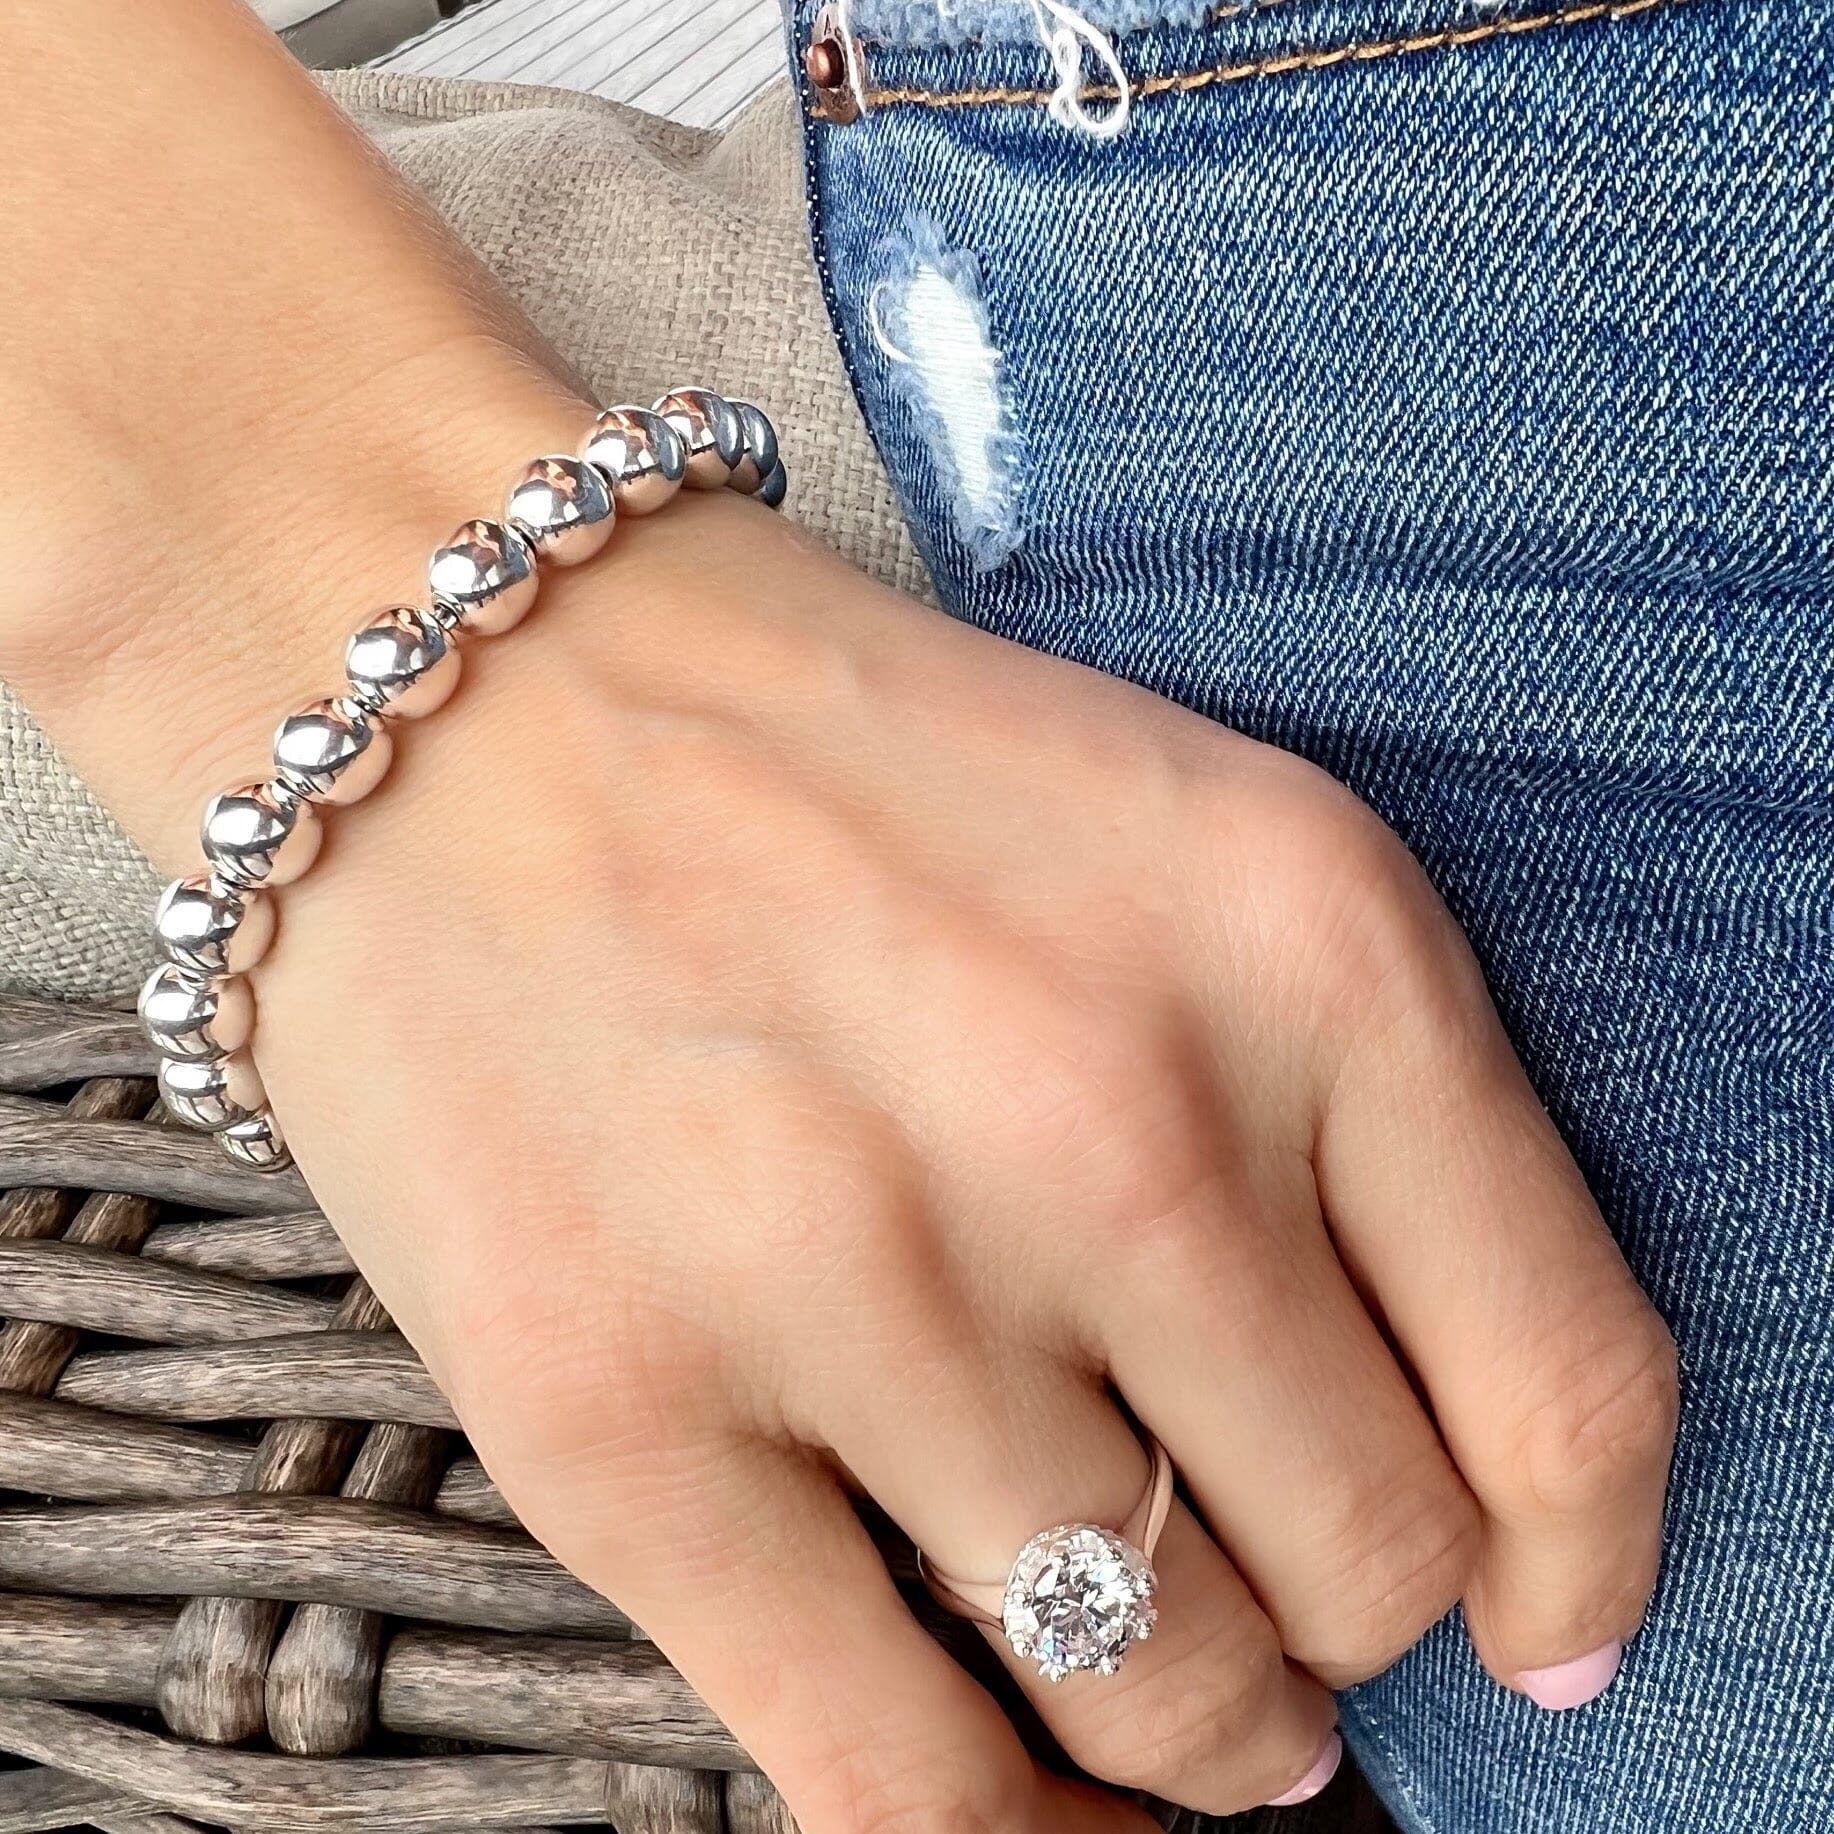 Beaded ball bracelet with Diana sterling silver and cz ring